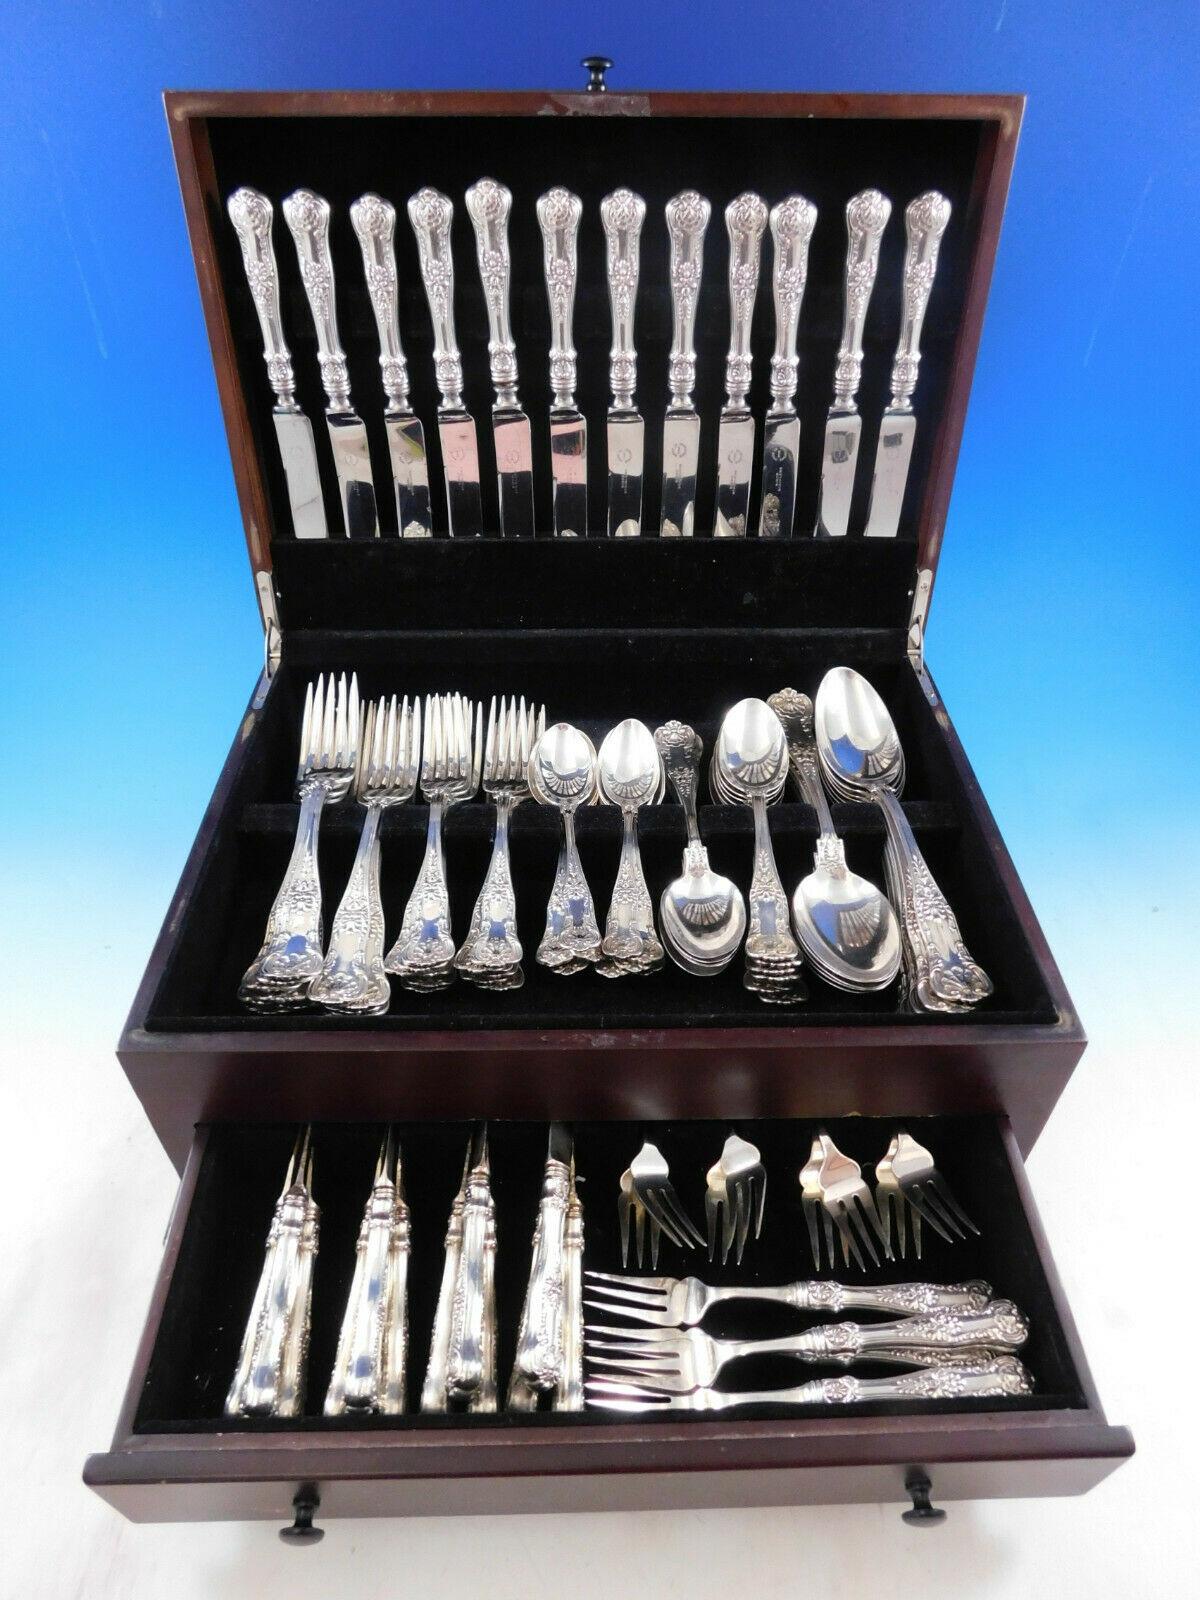 New Queens by Gorham sterling silver Flatware set, 96 pieces. This timeless, classic, shell-motif pattern was introduced in the year 1899. This set includes:

12 Knives, 9